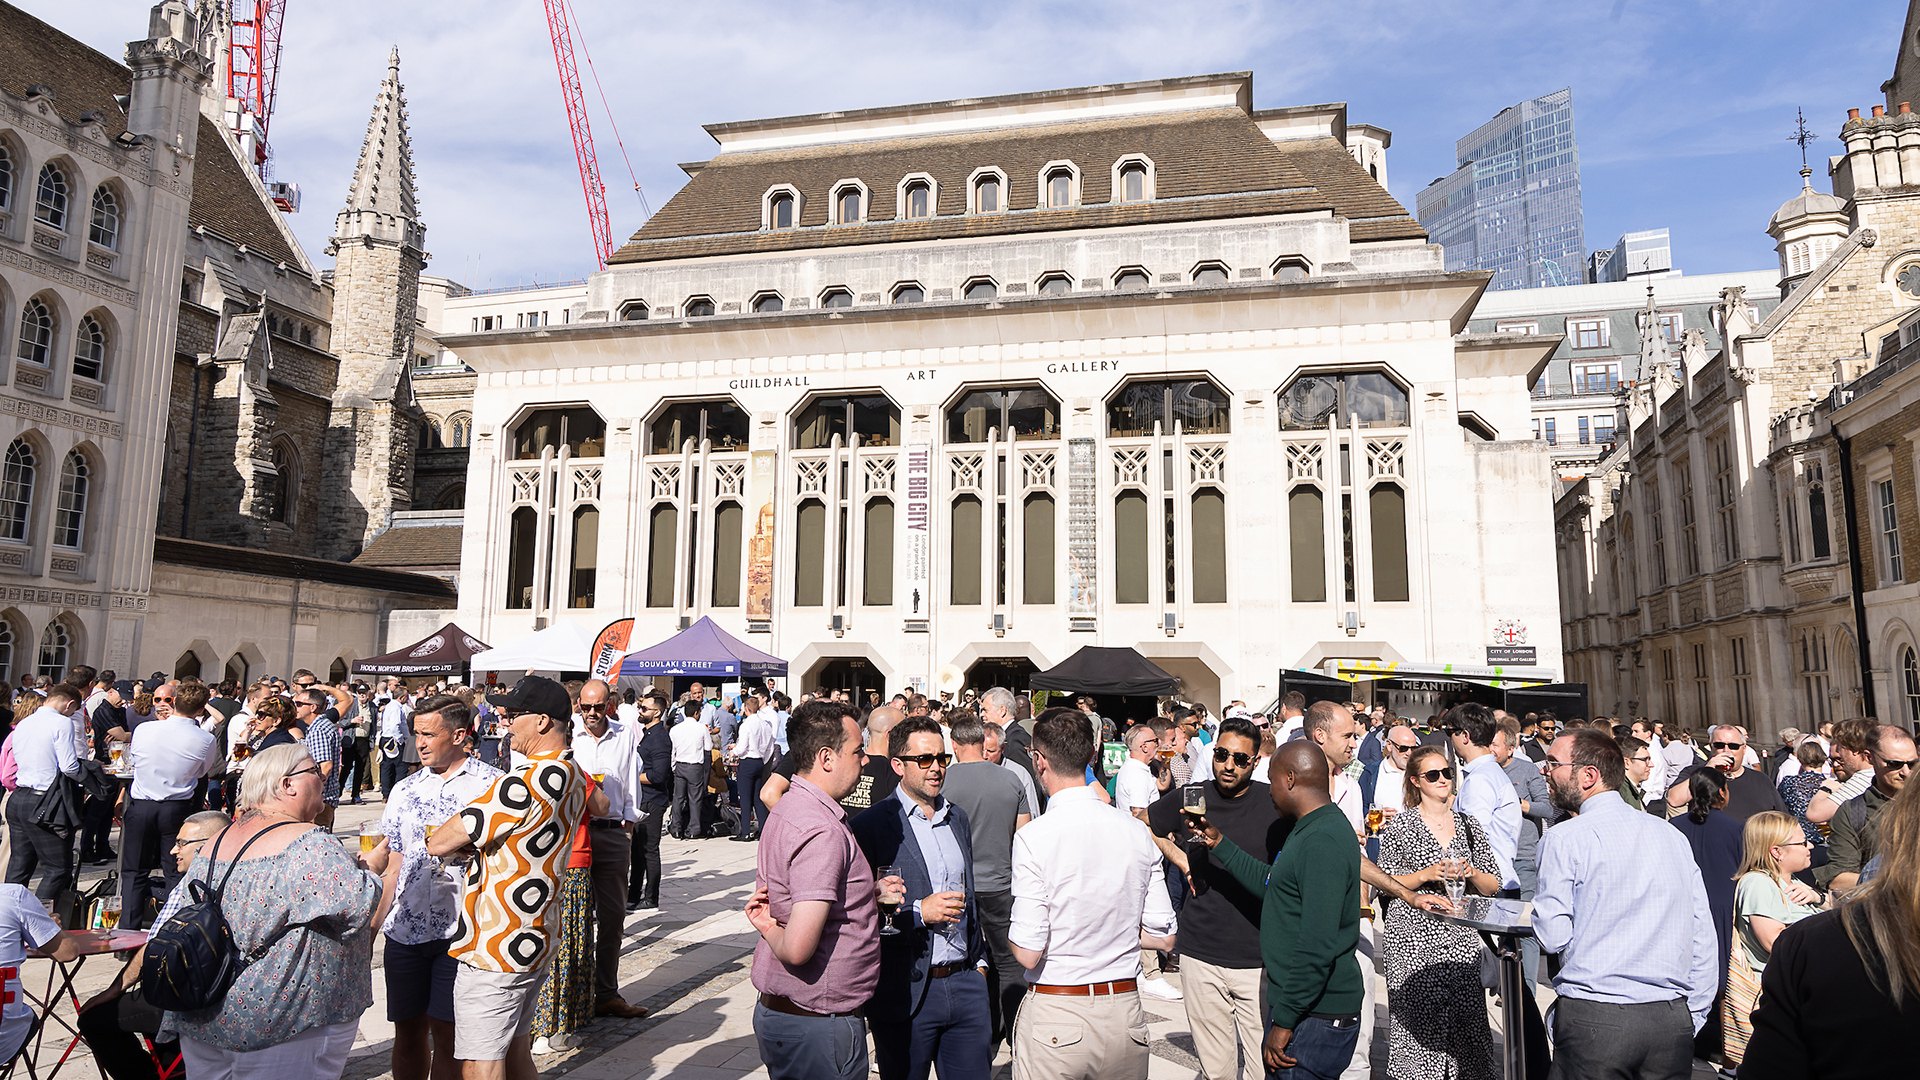 People standing in Guildhall Yard during City Beerfest.